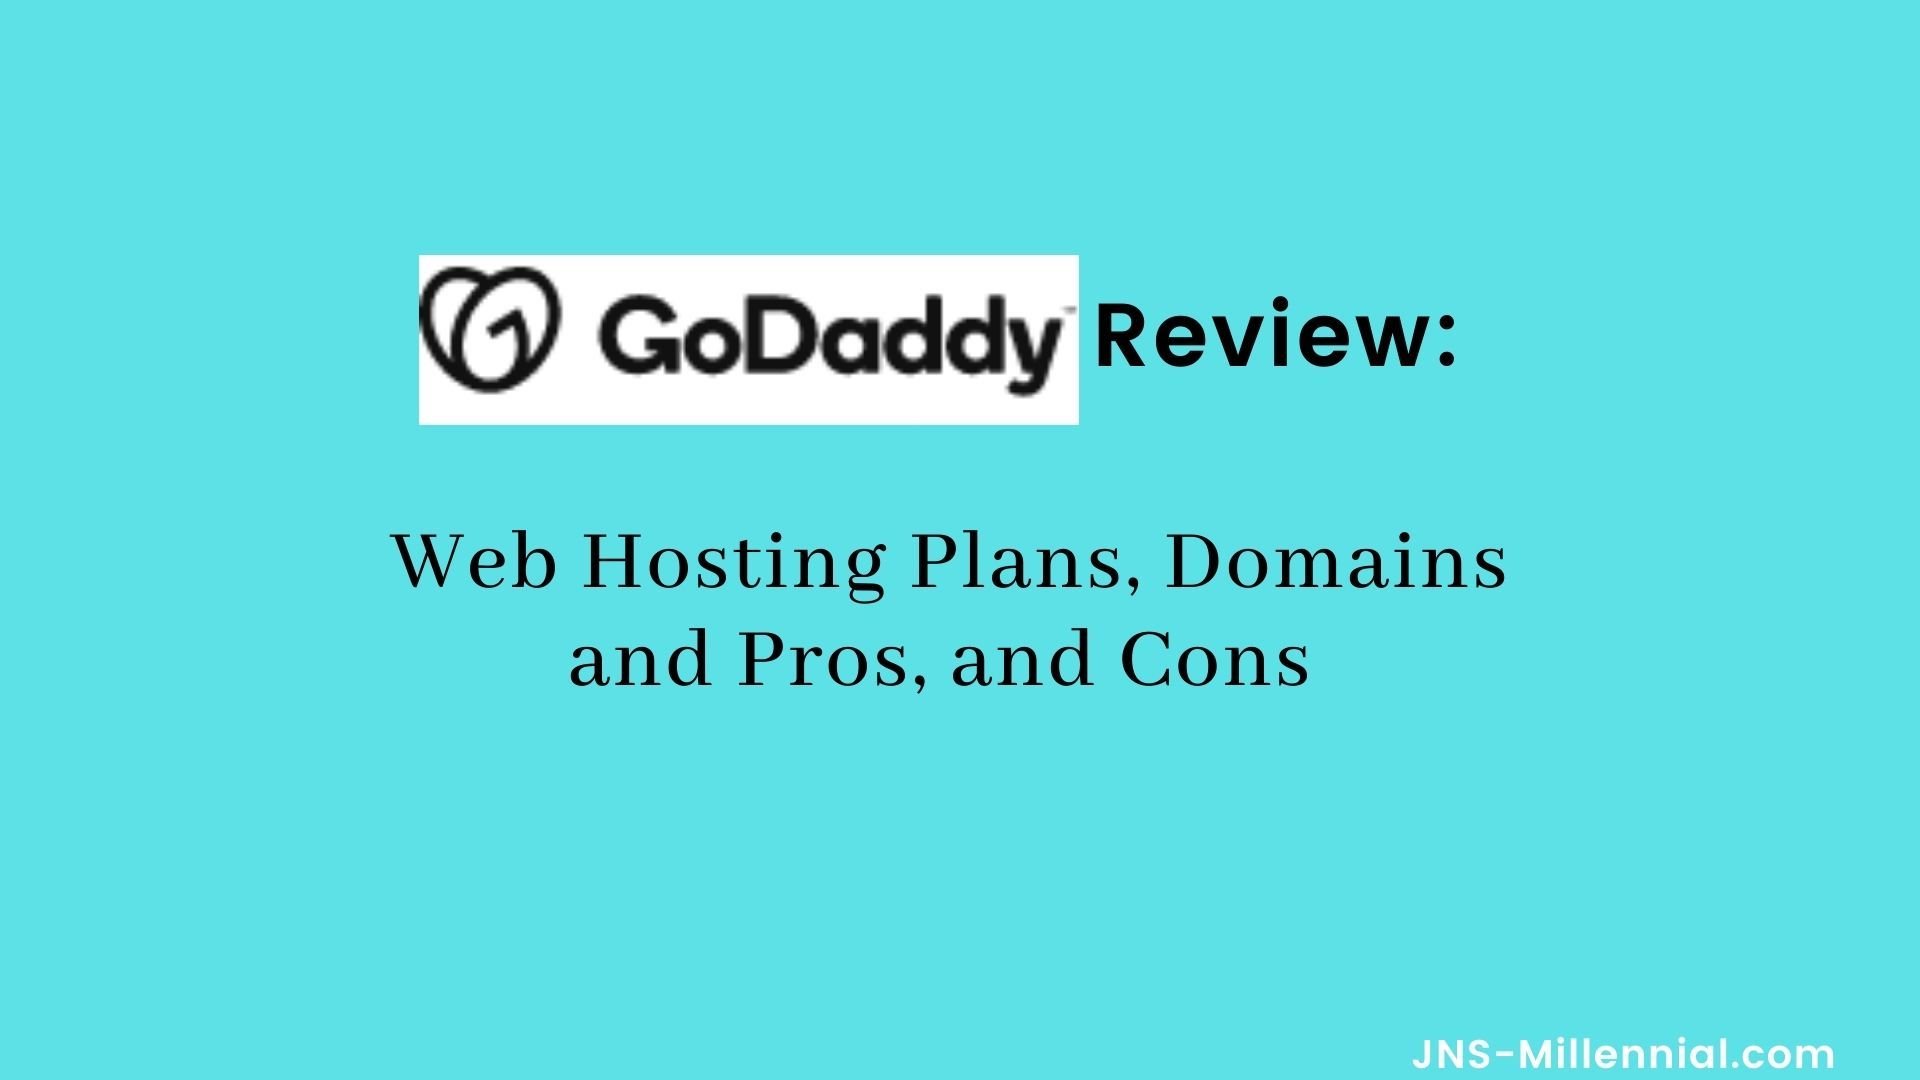 GoDaddy Review: Web Hosting Plans, Domains and Pros, and Cons